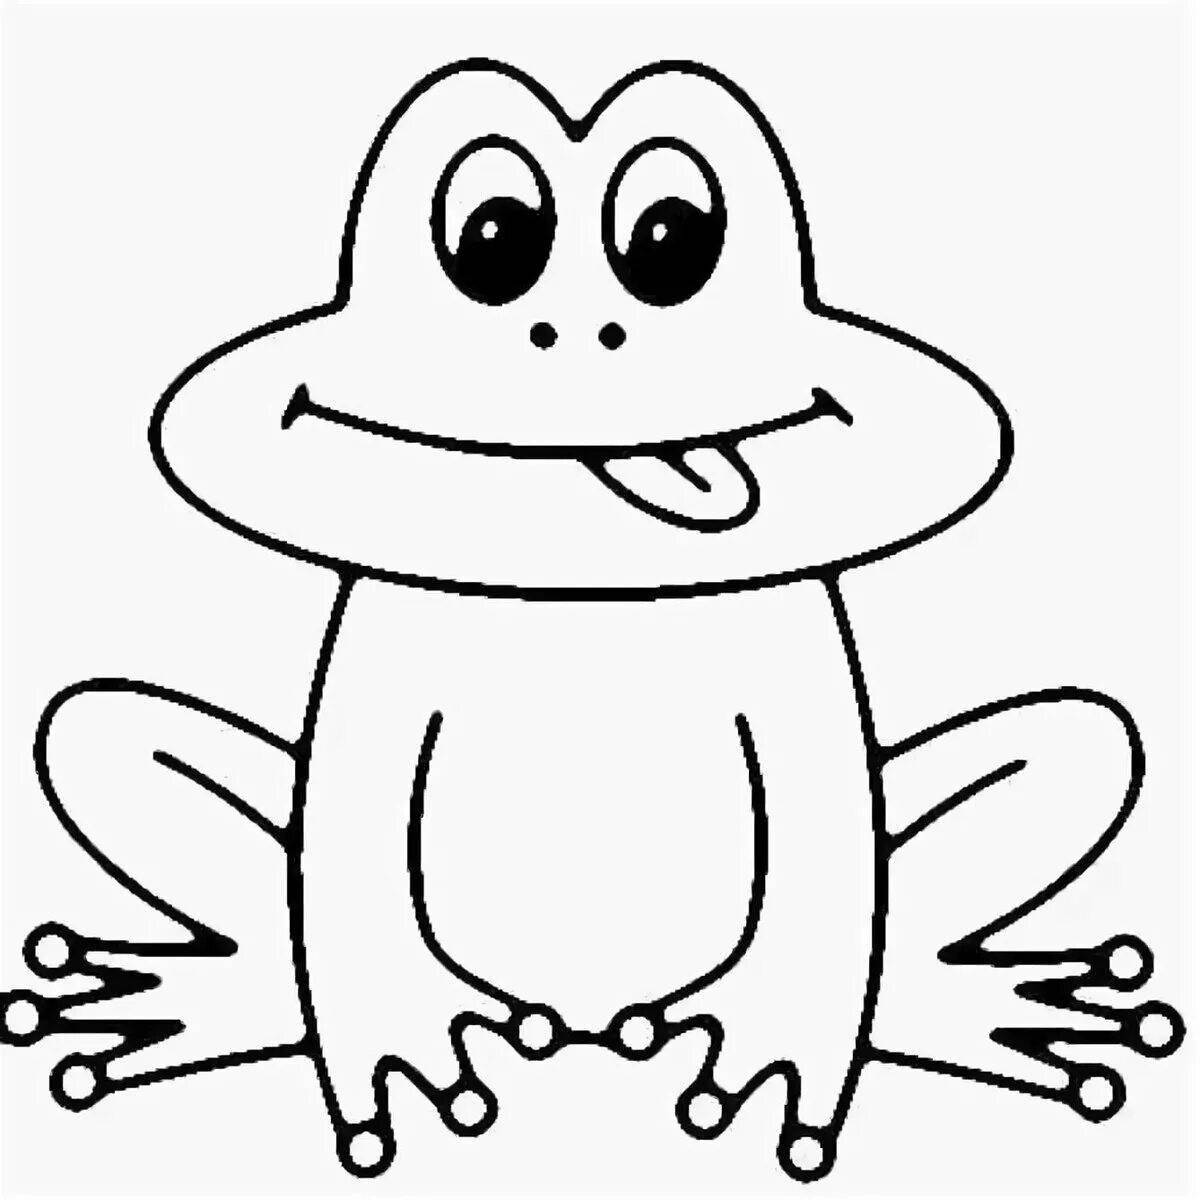 Shiny frog coloring book